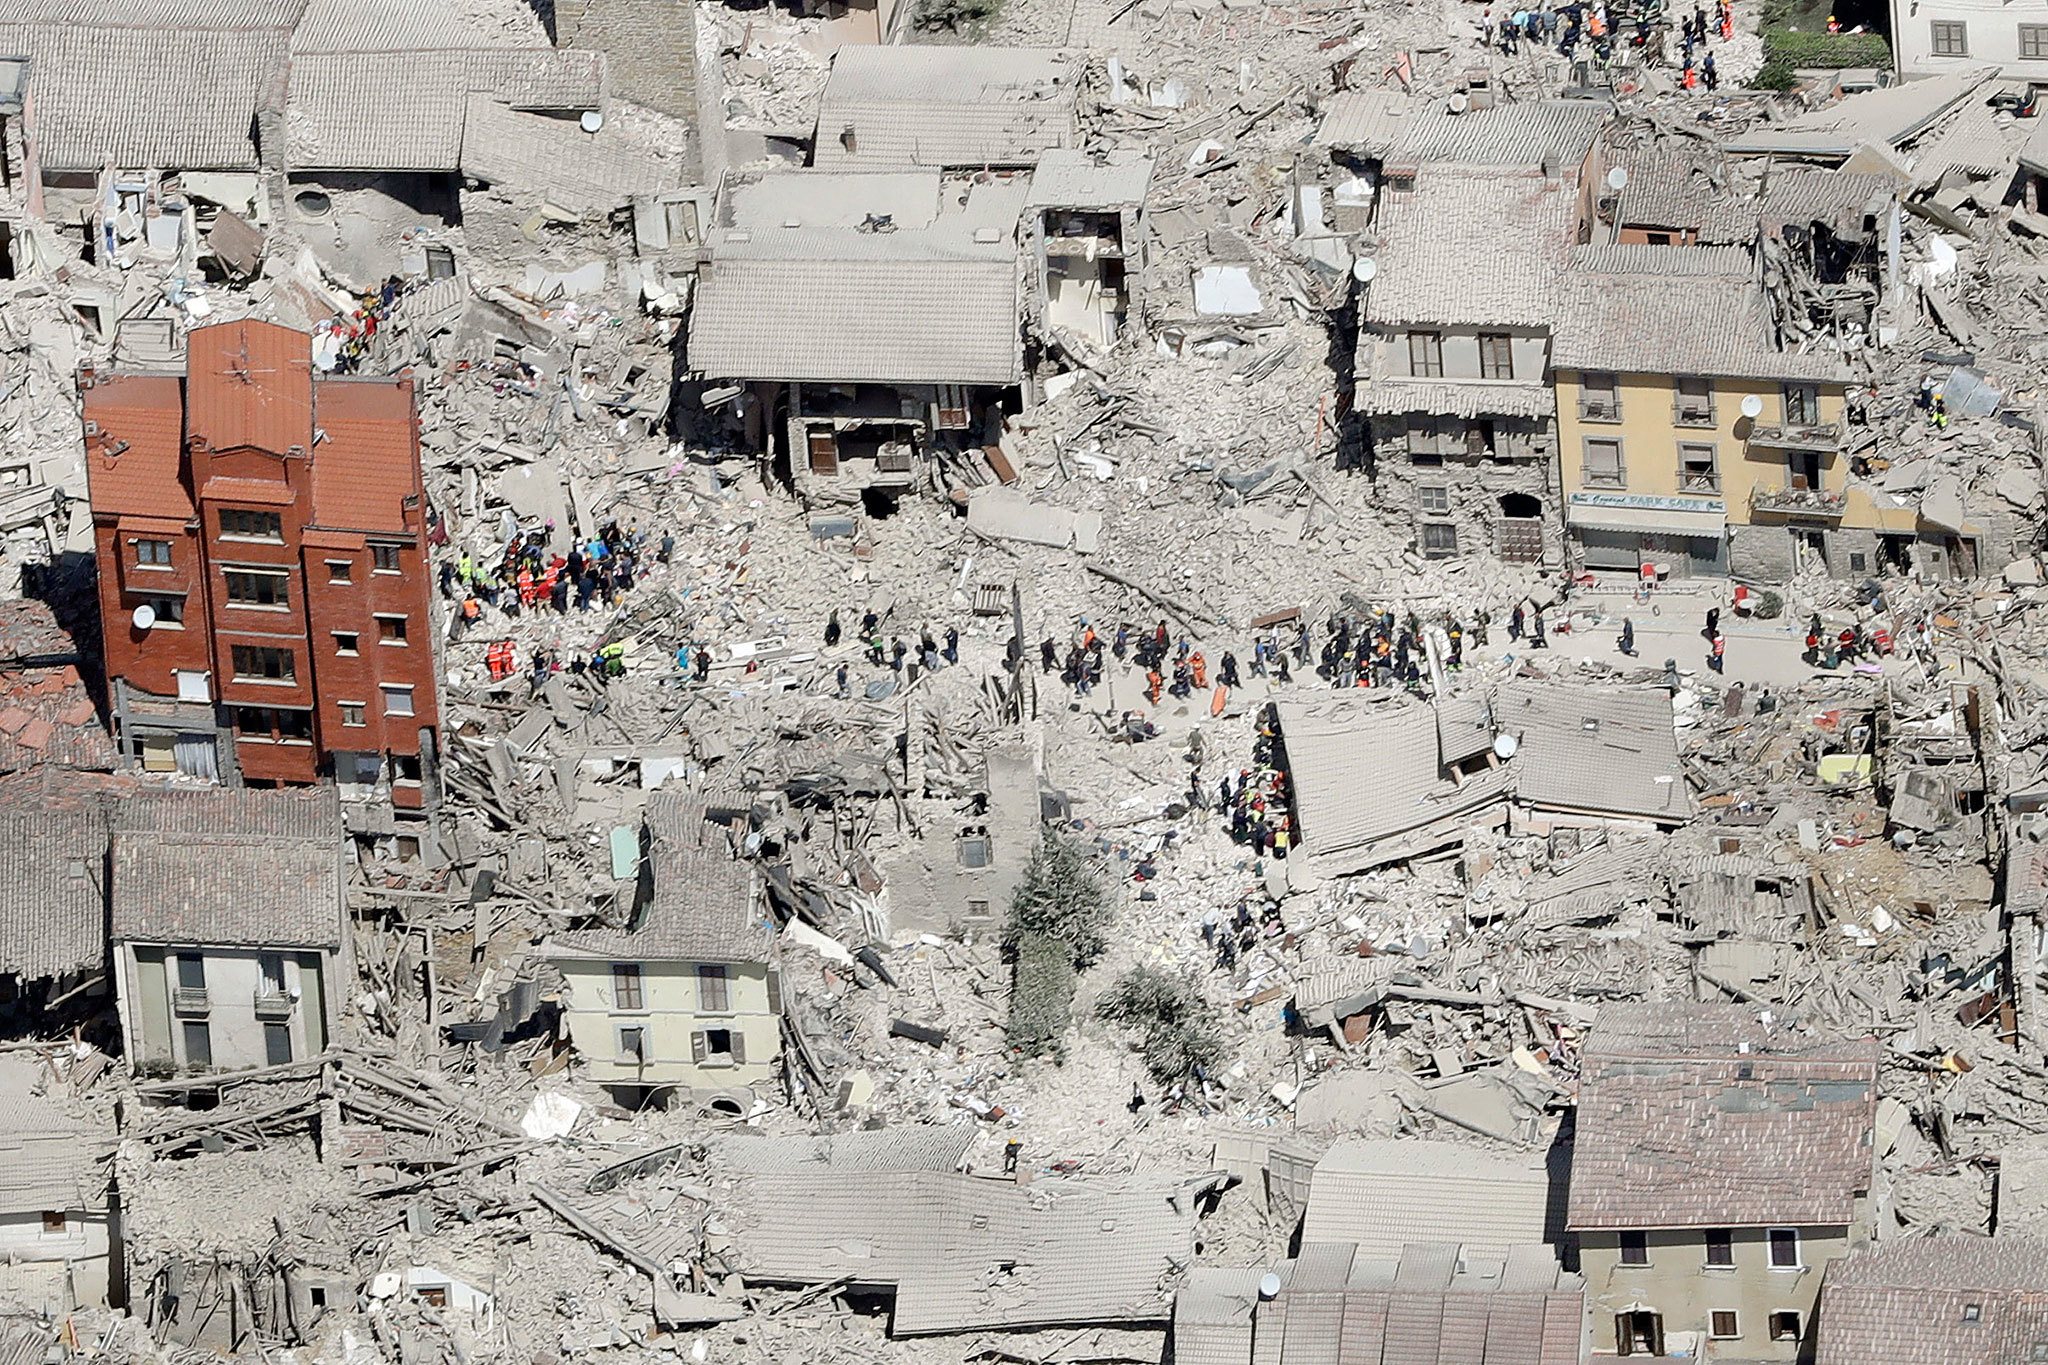 This Aug. 24 aerial photo shows damaged buildings in the town of Amatrice, Italy, after an earthquake. (AP Photo/Gregorio Borgia)